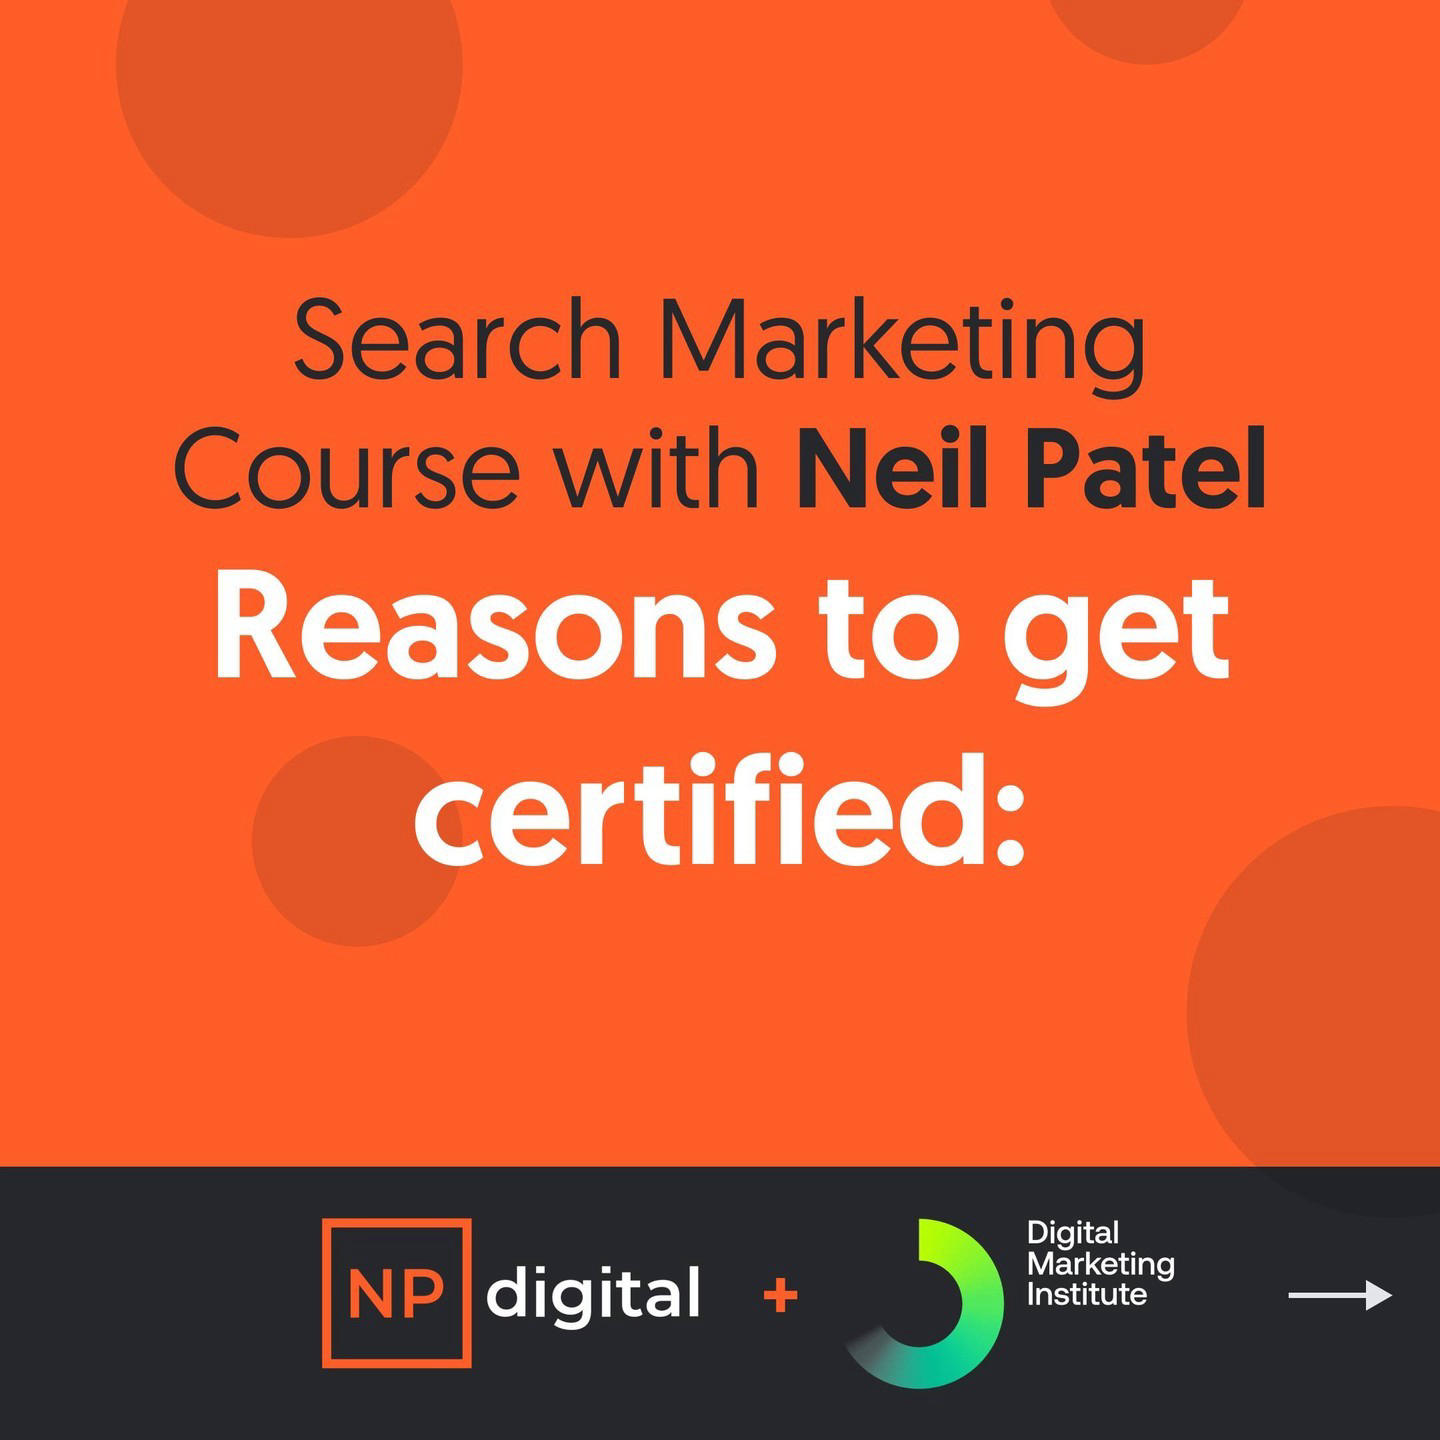 Neil Patel - Show off your skills with certification